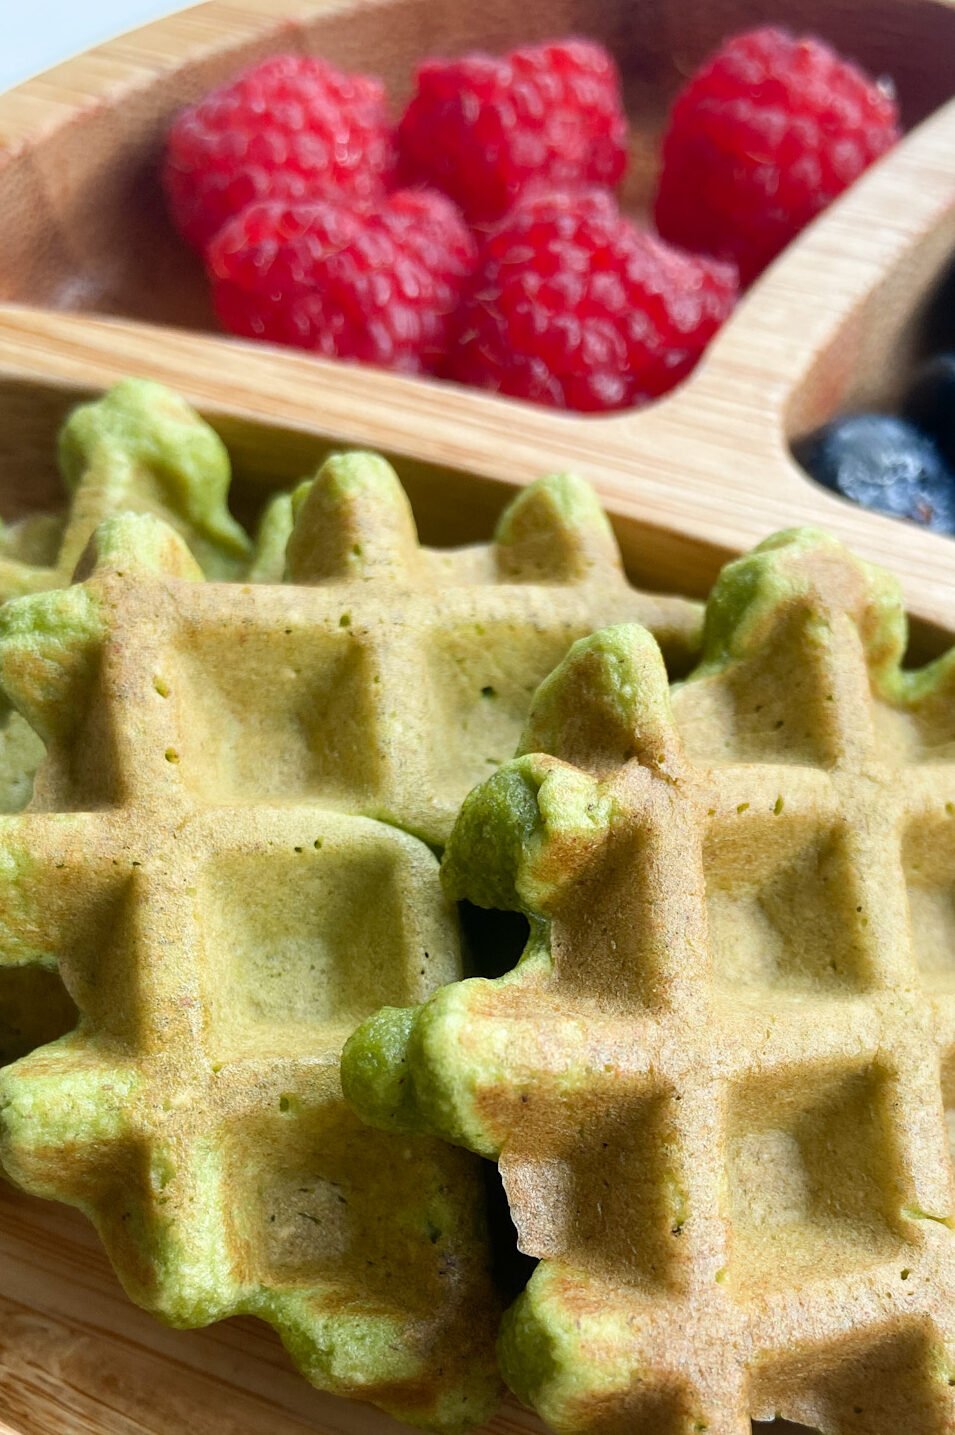 Spinach banana waffles served with raspberries and blueberries